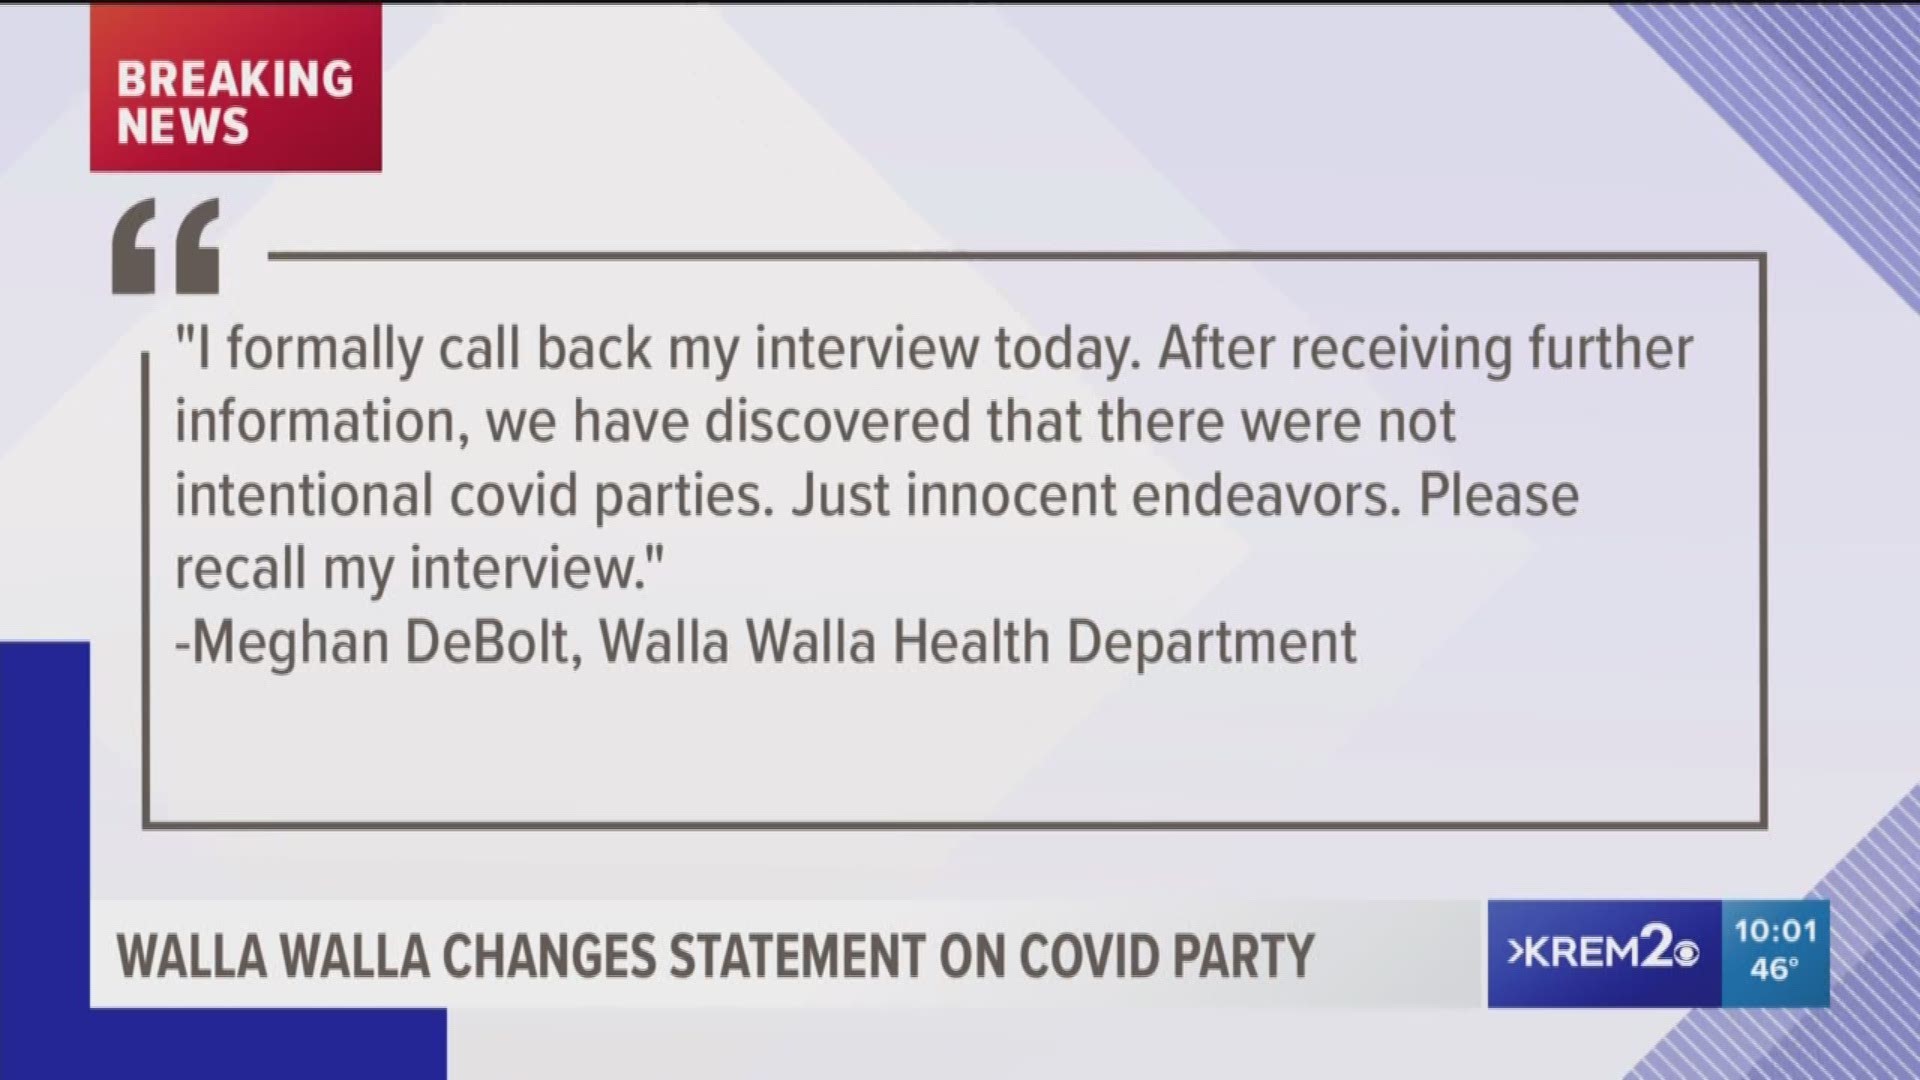 Walla Walla County Health officials previously said people were intentionally attending parties with those who had tested positive coronavirus.